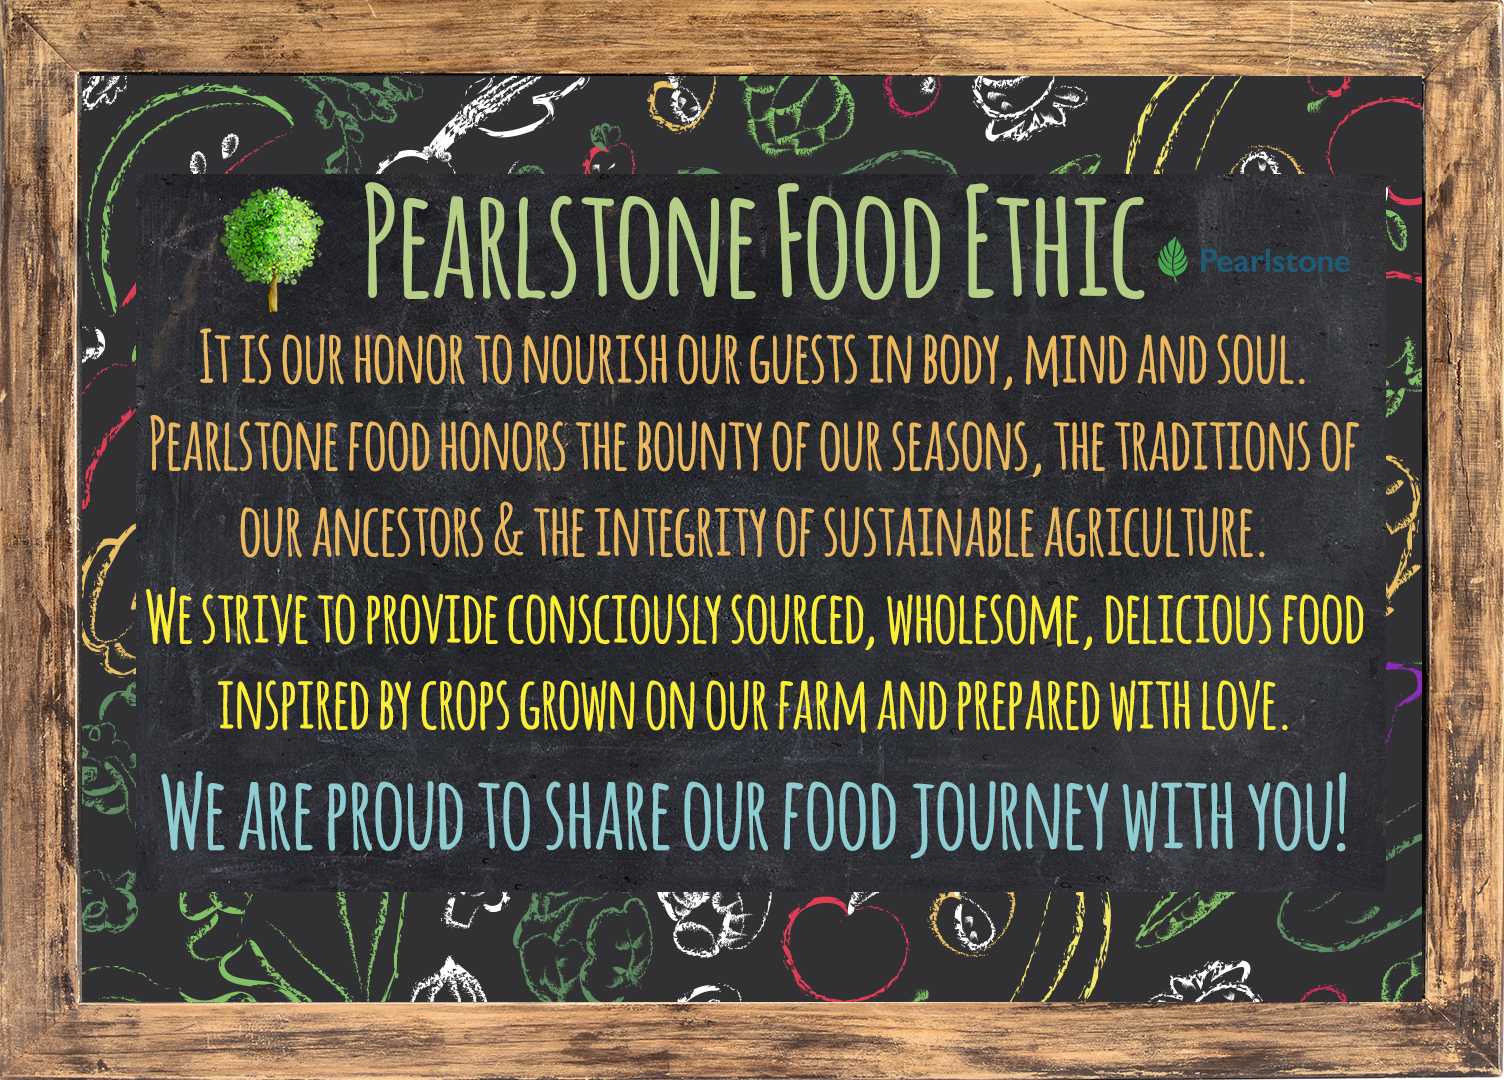 Pearlstone Food Ethic - committed to nourishing our guests in body, mind, and soul. Our food honors the bounty of the seasons, the traditions of our ancestors, and the integrity of sustainable agriculture. We provide consciously sourced, wholesome, delicious food inspired by crops grown on our farm and prepared with love and care. We are always striving to improve, and we are proud to share our food journey with you.